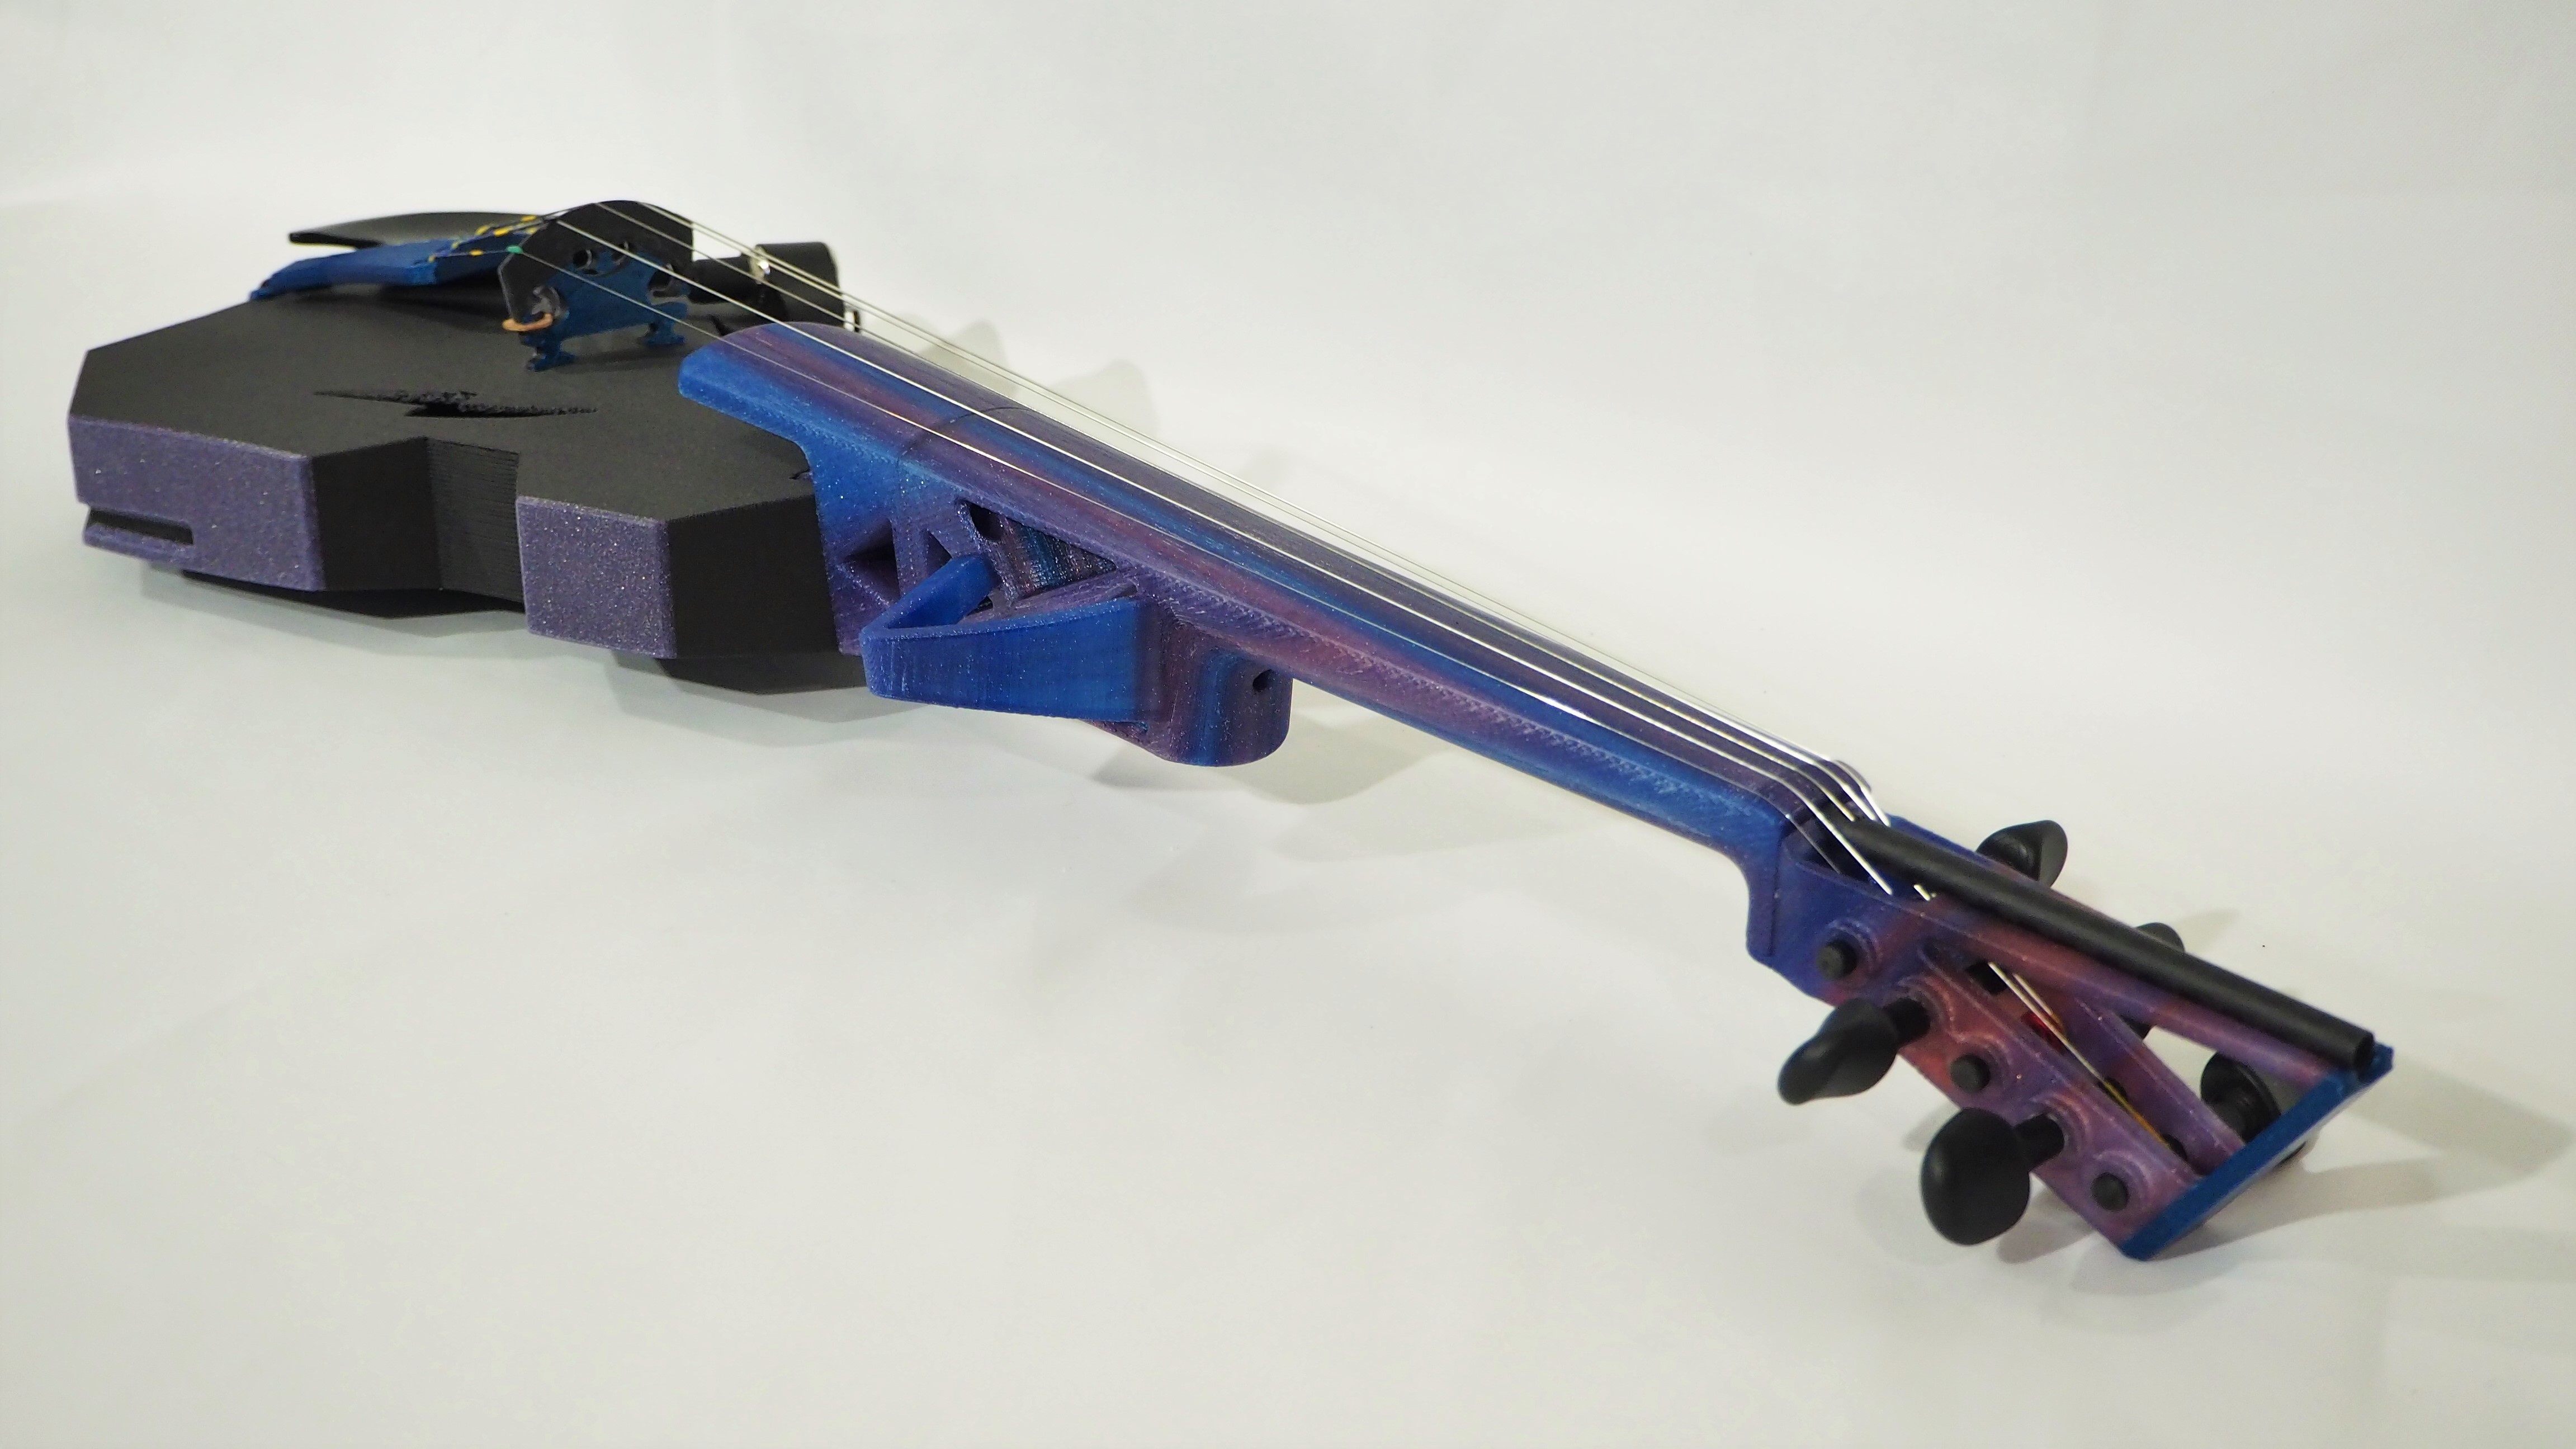 A long five string viola with a 380mm string length